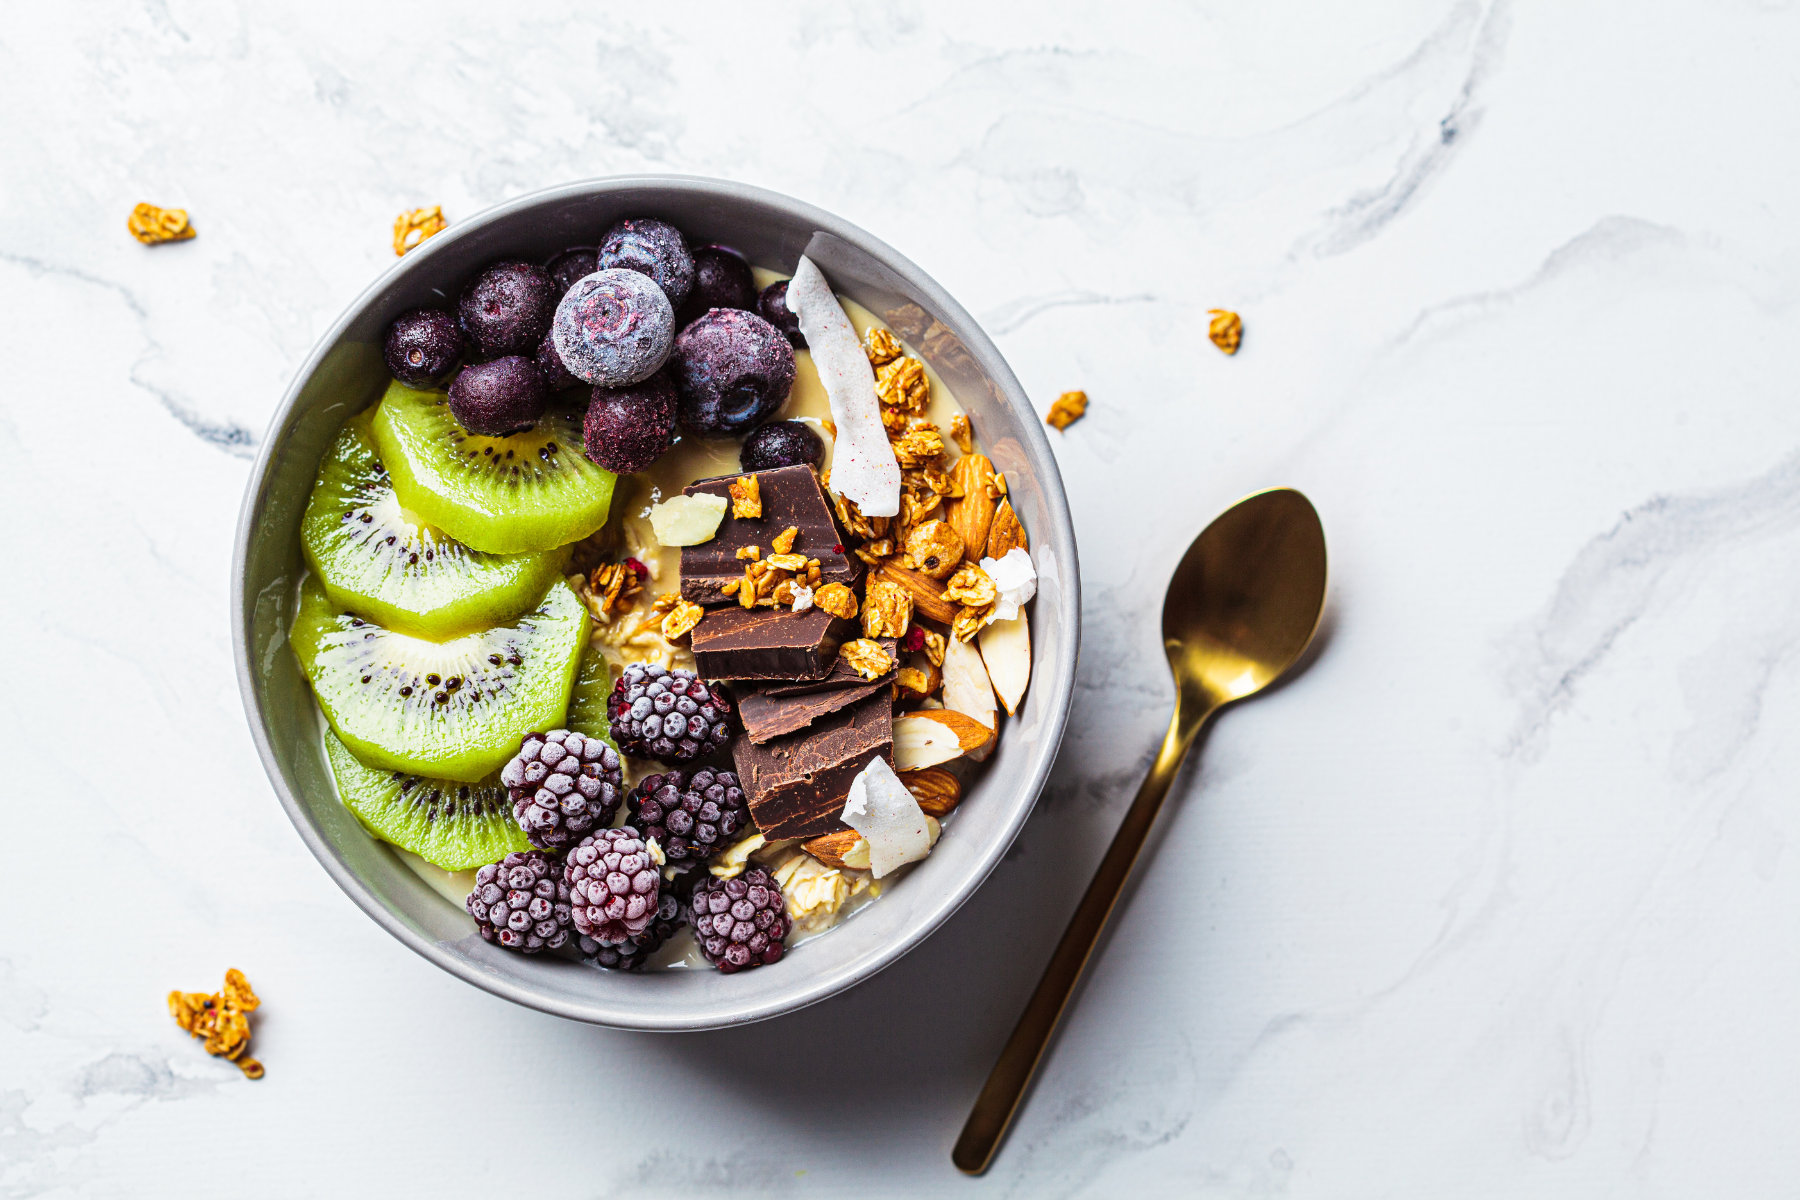 A nutritious breakfast bowl with chocolate, berries, nuts and peanut butter for added health benefits.